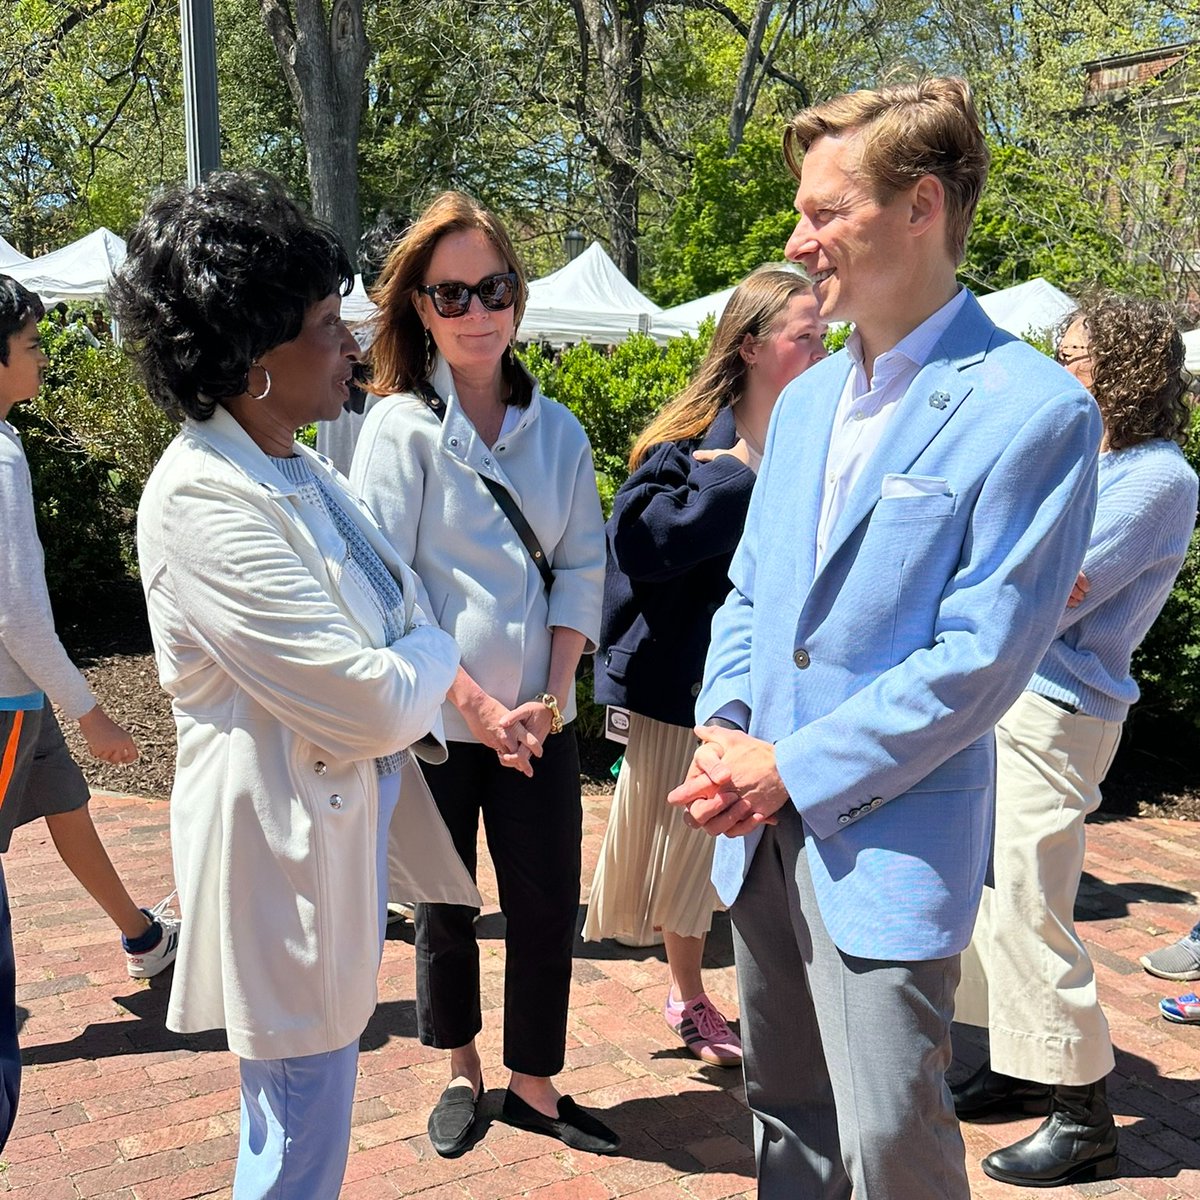 It was a pleasure to celebrate @MoreheadPlanet's 75th anniversary at the @UNC Science Expo! Morehead Planetarium provides students & the community with equitable learning opportunities in STEM and I’m proud to support this essential education center at the federal level.